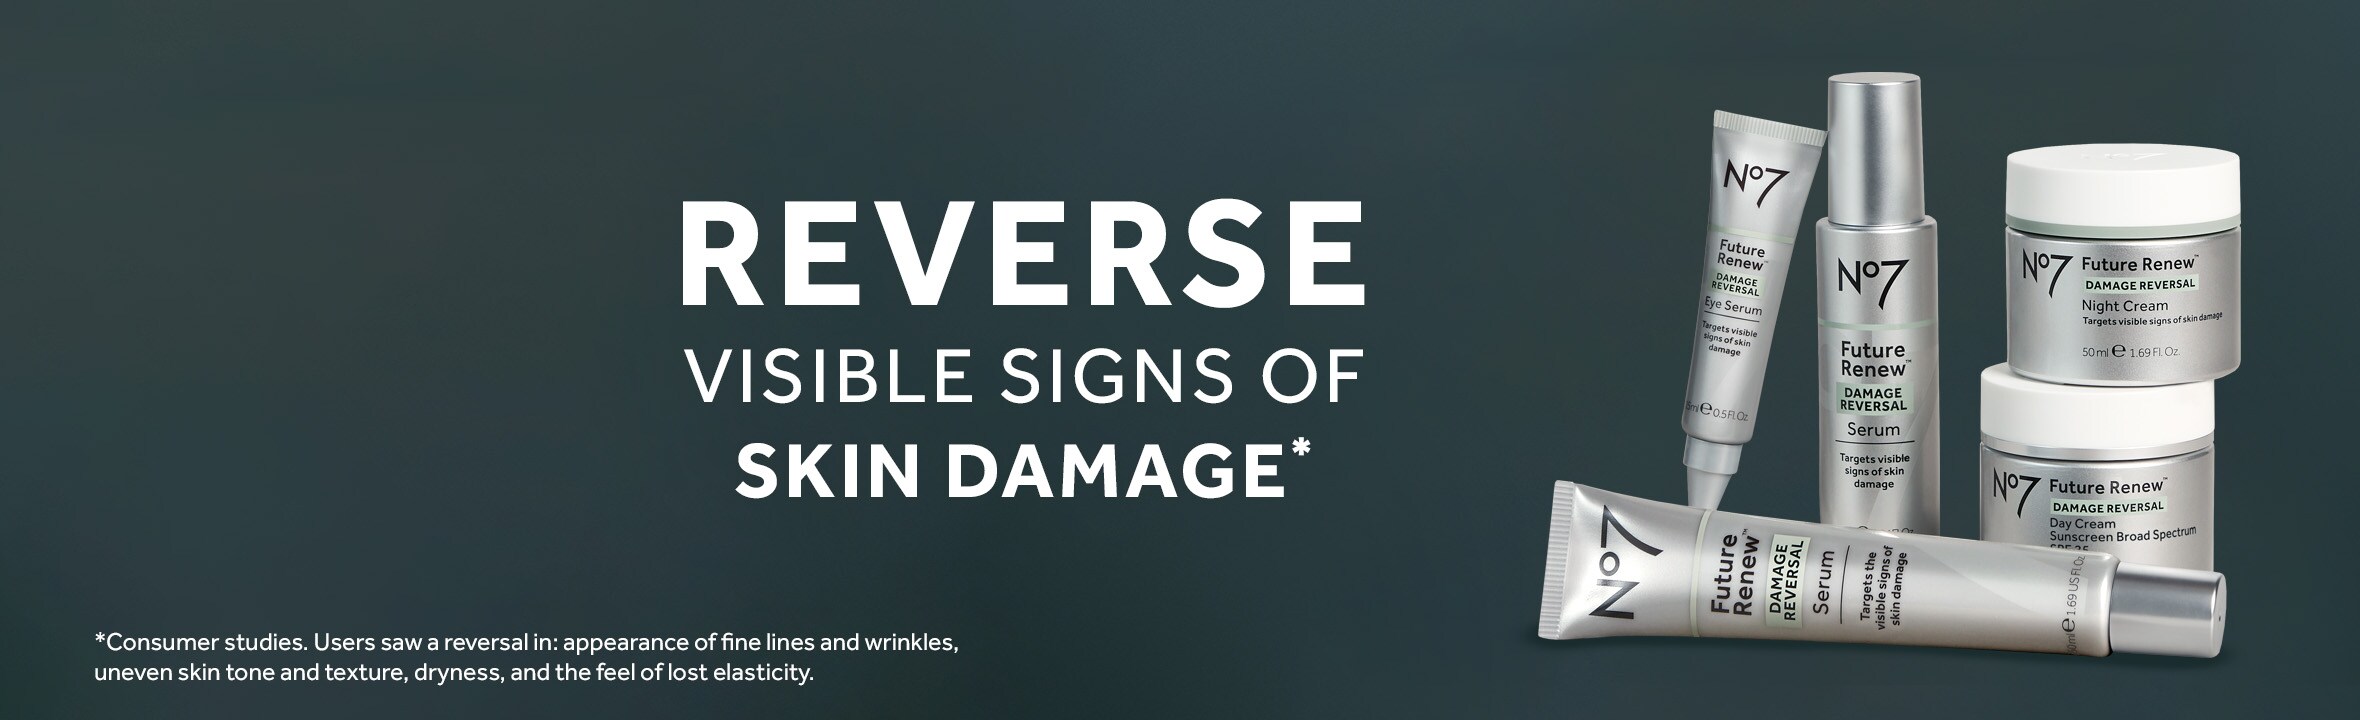 No7 Reverse visible signs of skin damage*. *Consumer studies. Users saw a reversal in: appearance of fine lines and wrinkles, uneven skin tone and texture, dryness, and the feel of lost elasticity.